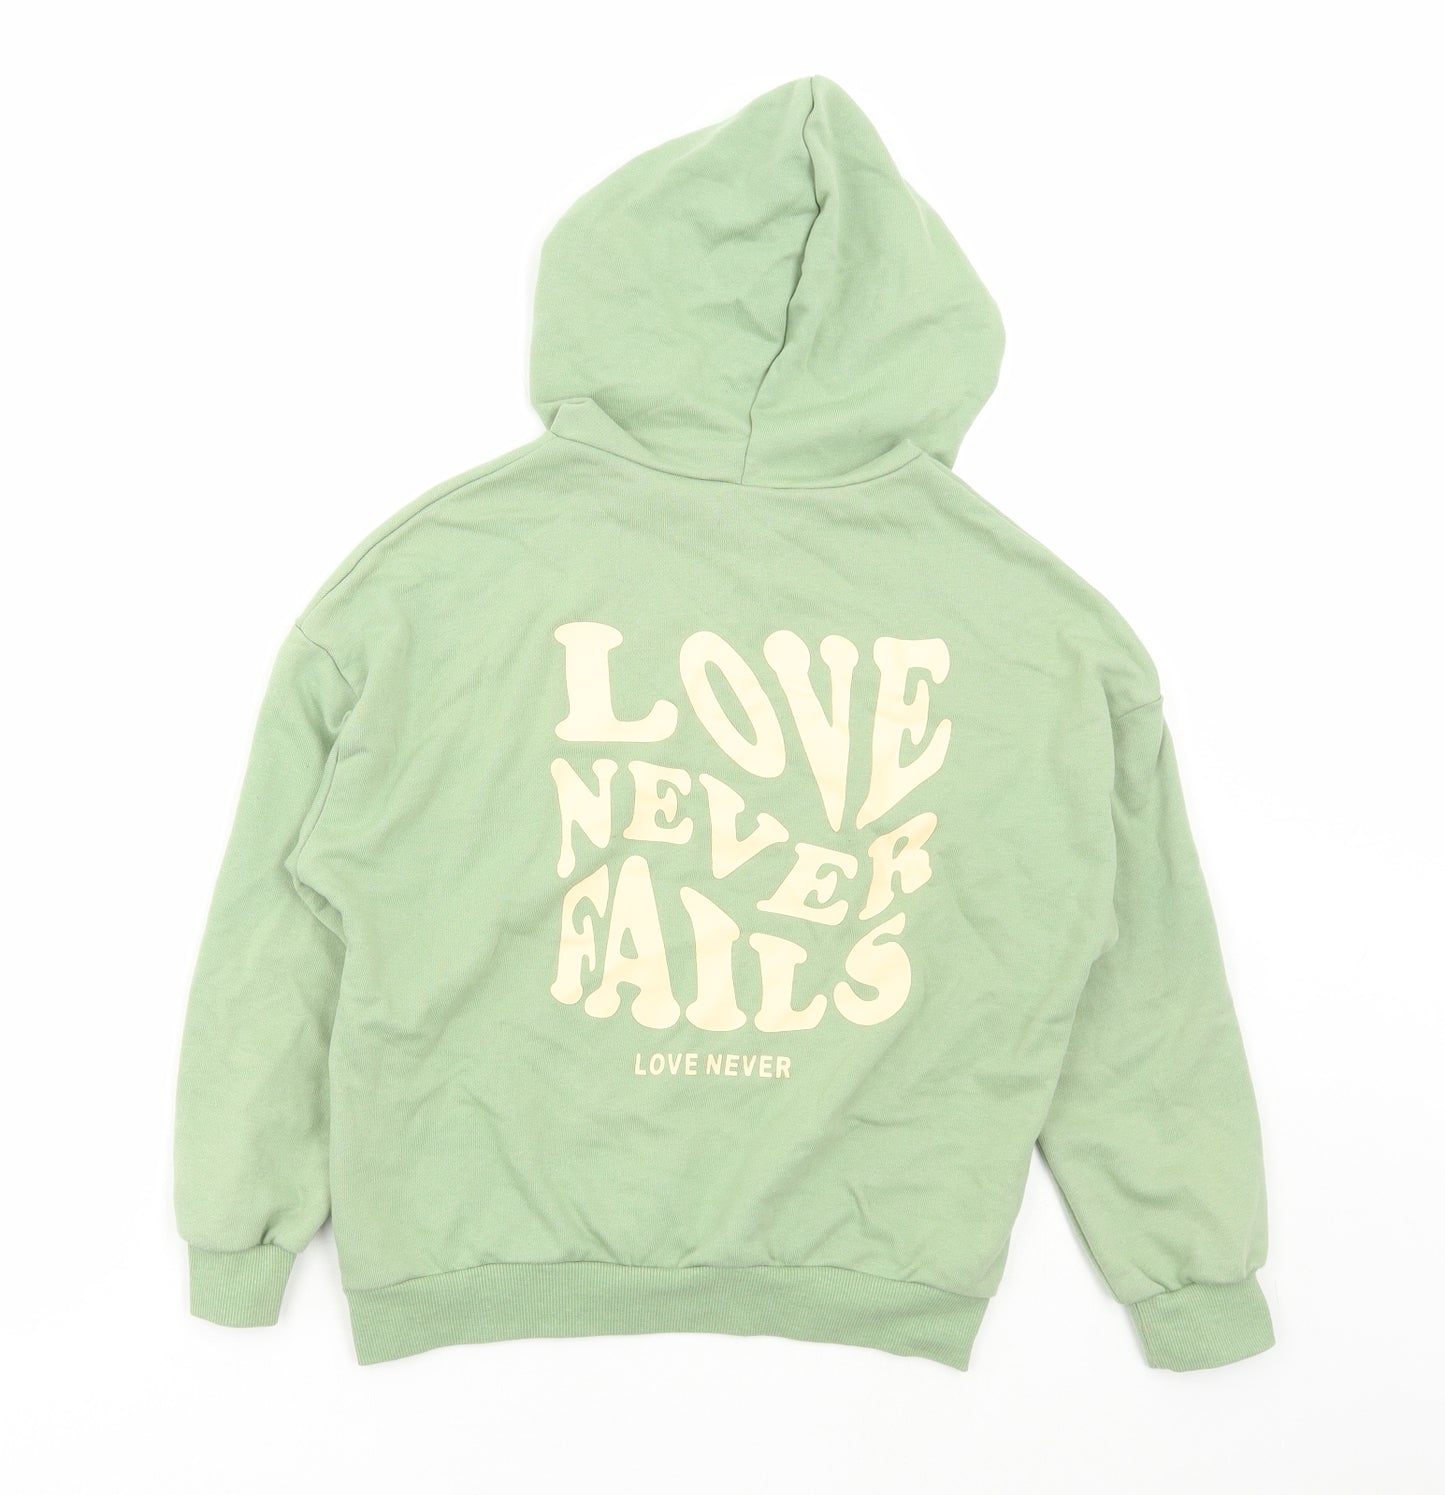 SheIn Girls Green Cotton Pullover Hoodie Size 10-11 Years Pullover - Love never fails